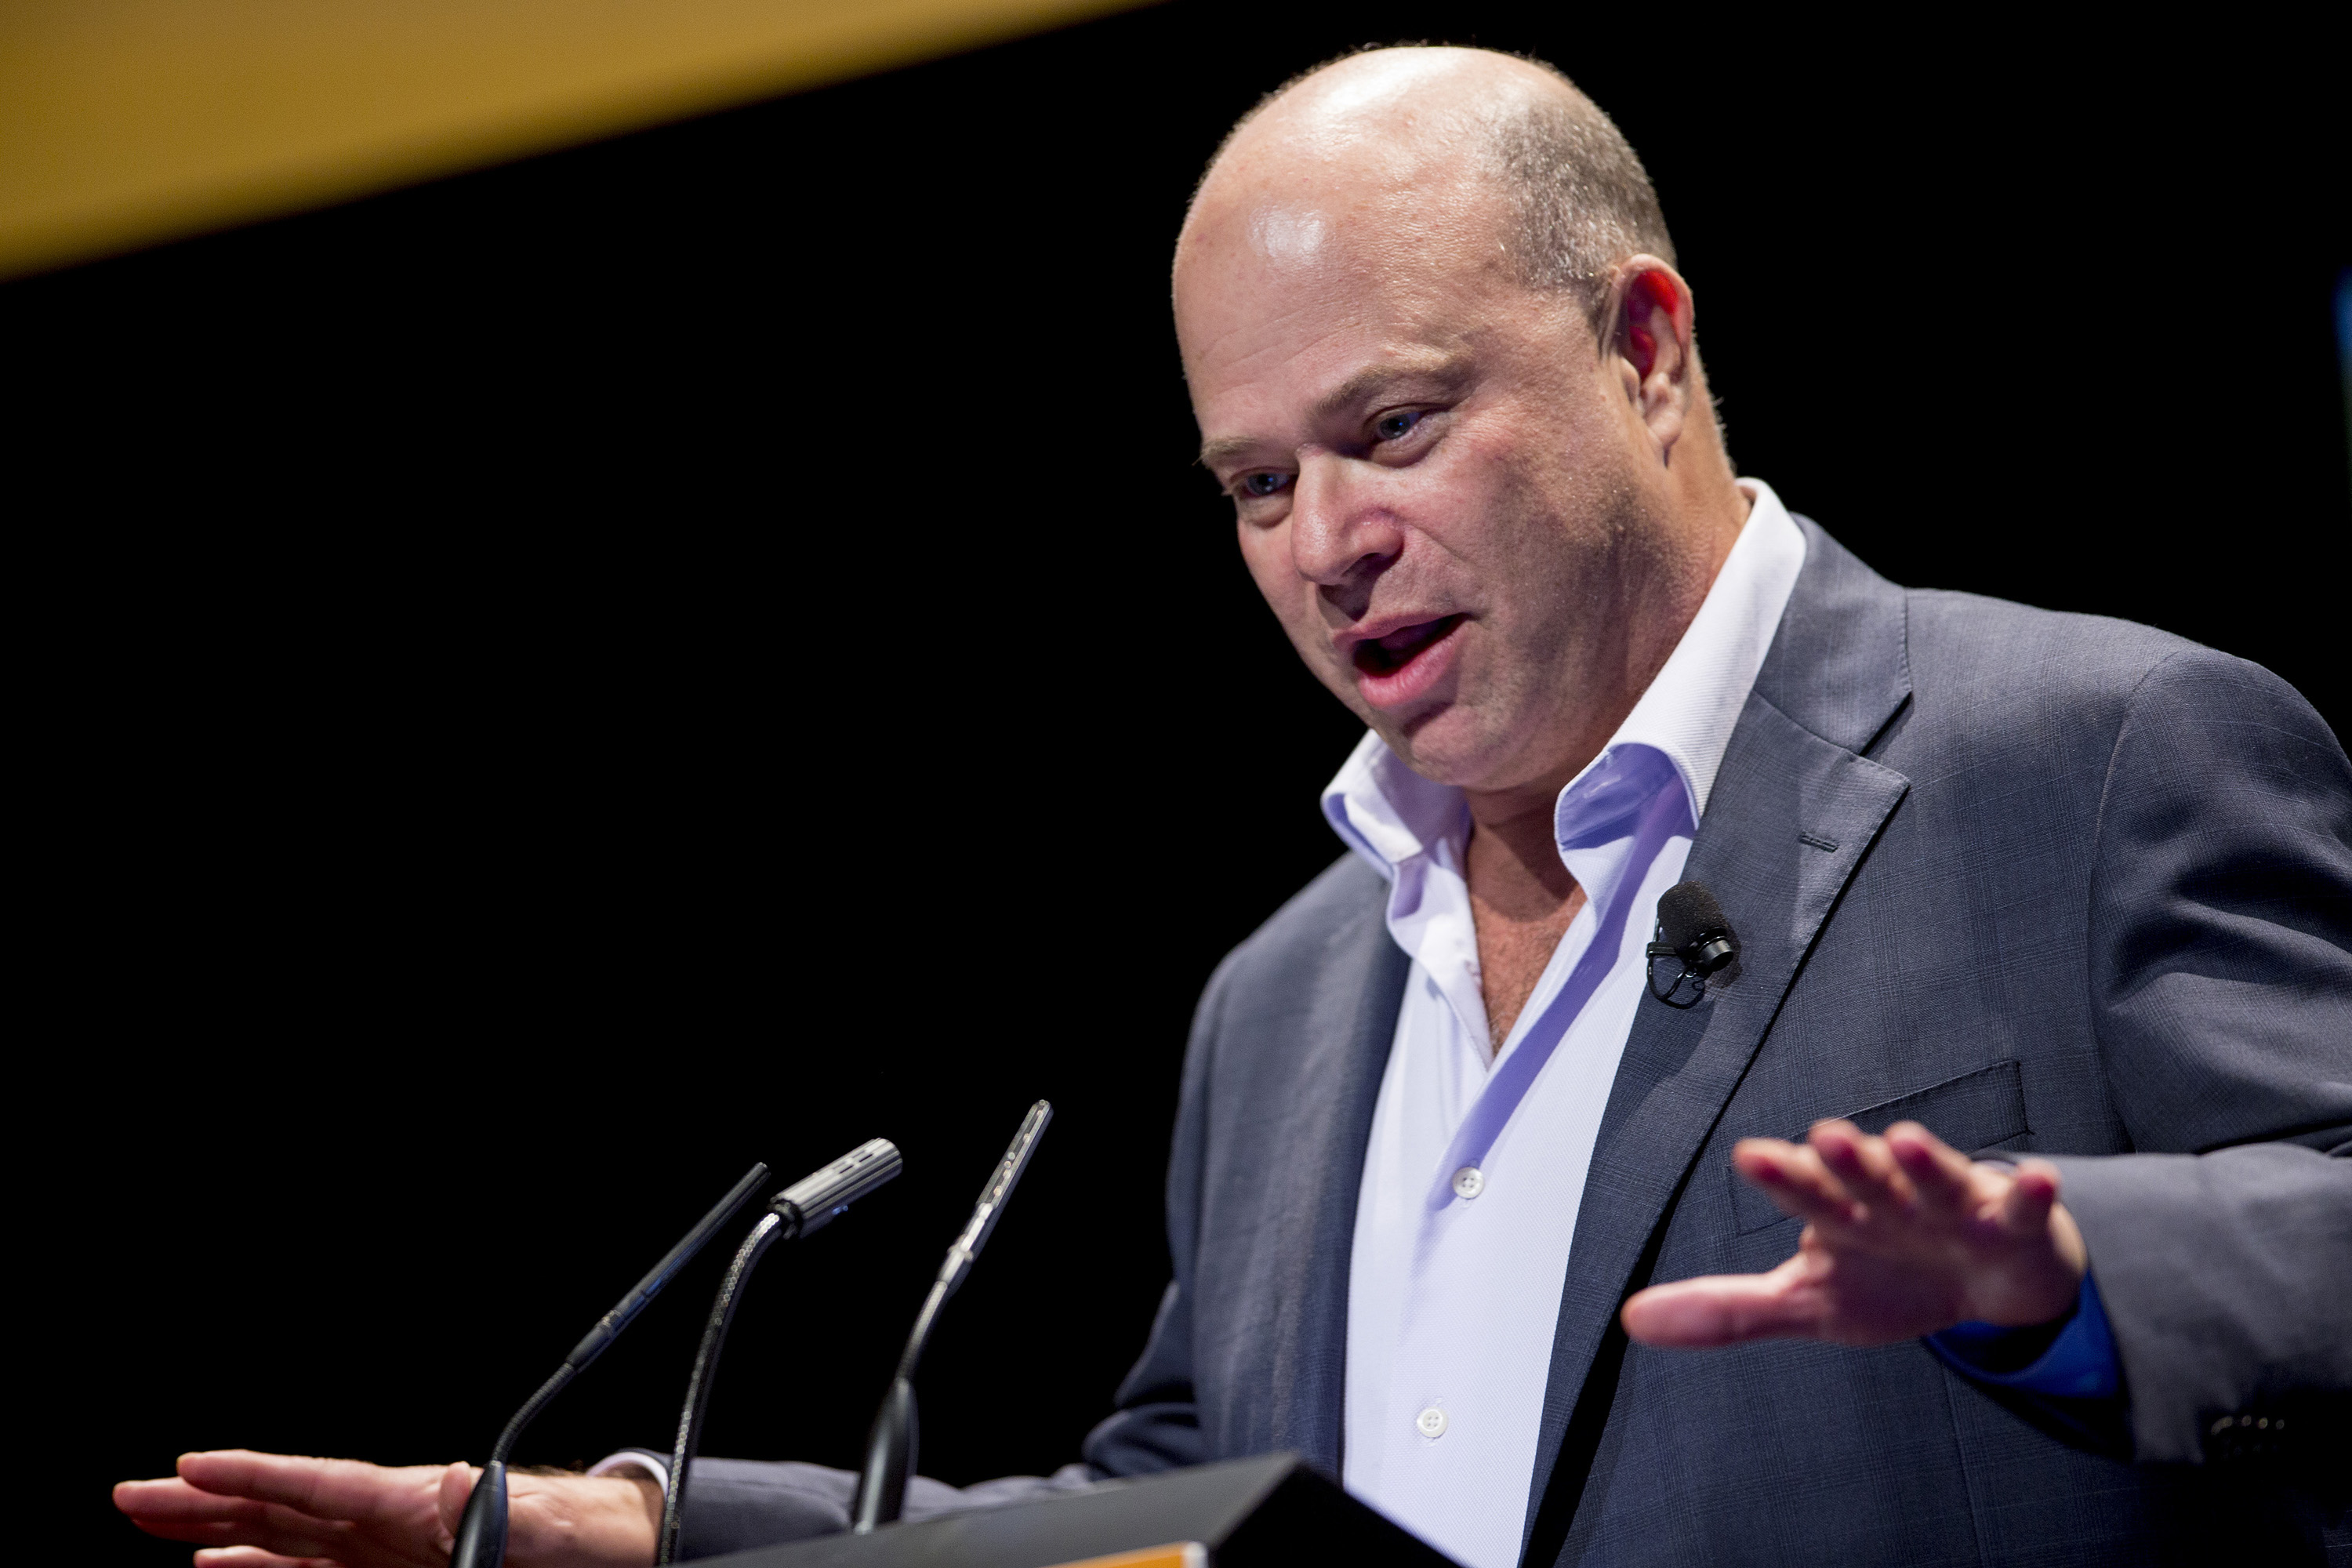 David Tepper, president of Appaloosa Management LP, speaks during the 20th Annual Sohn Investment Conference in New York, on May 4, 2015.
